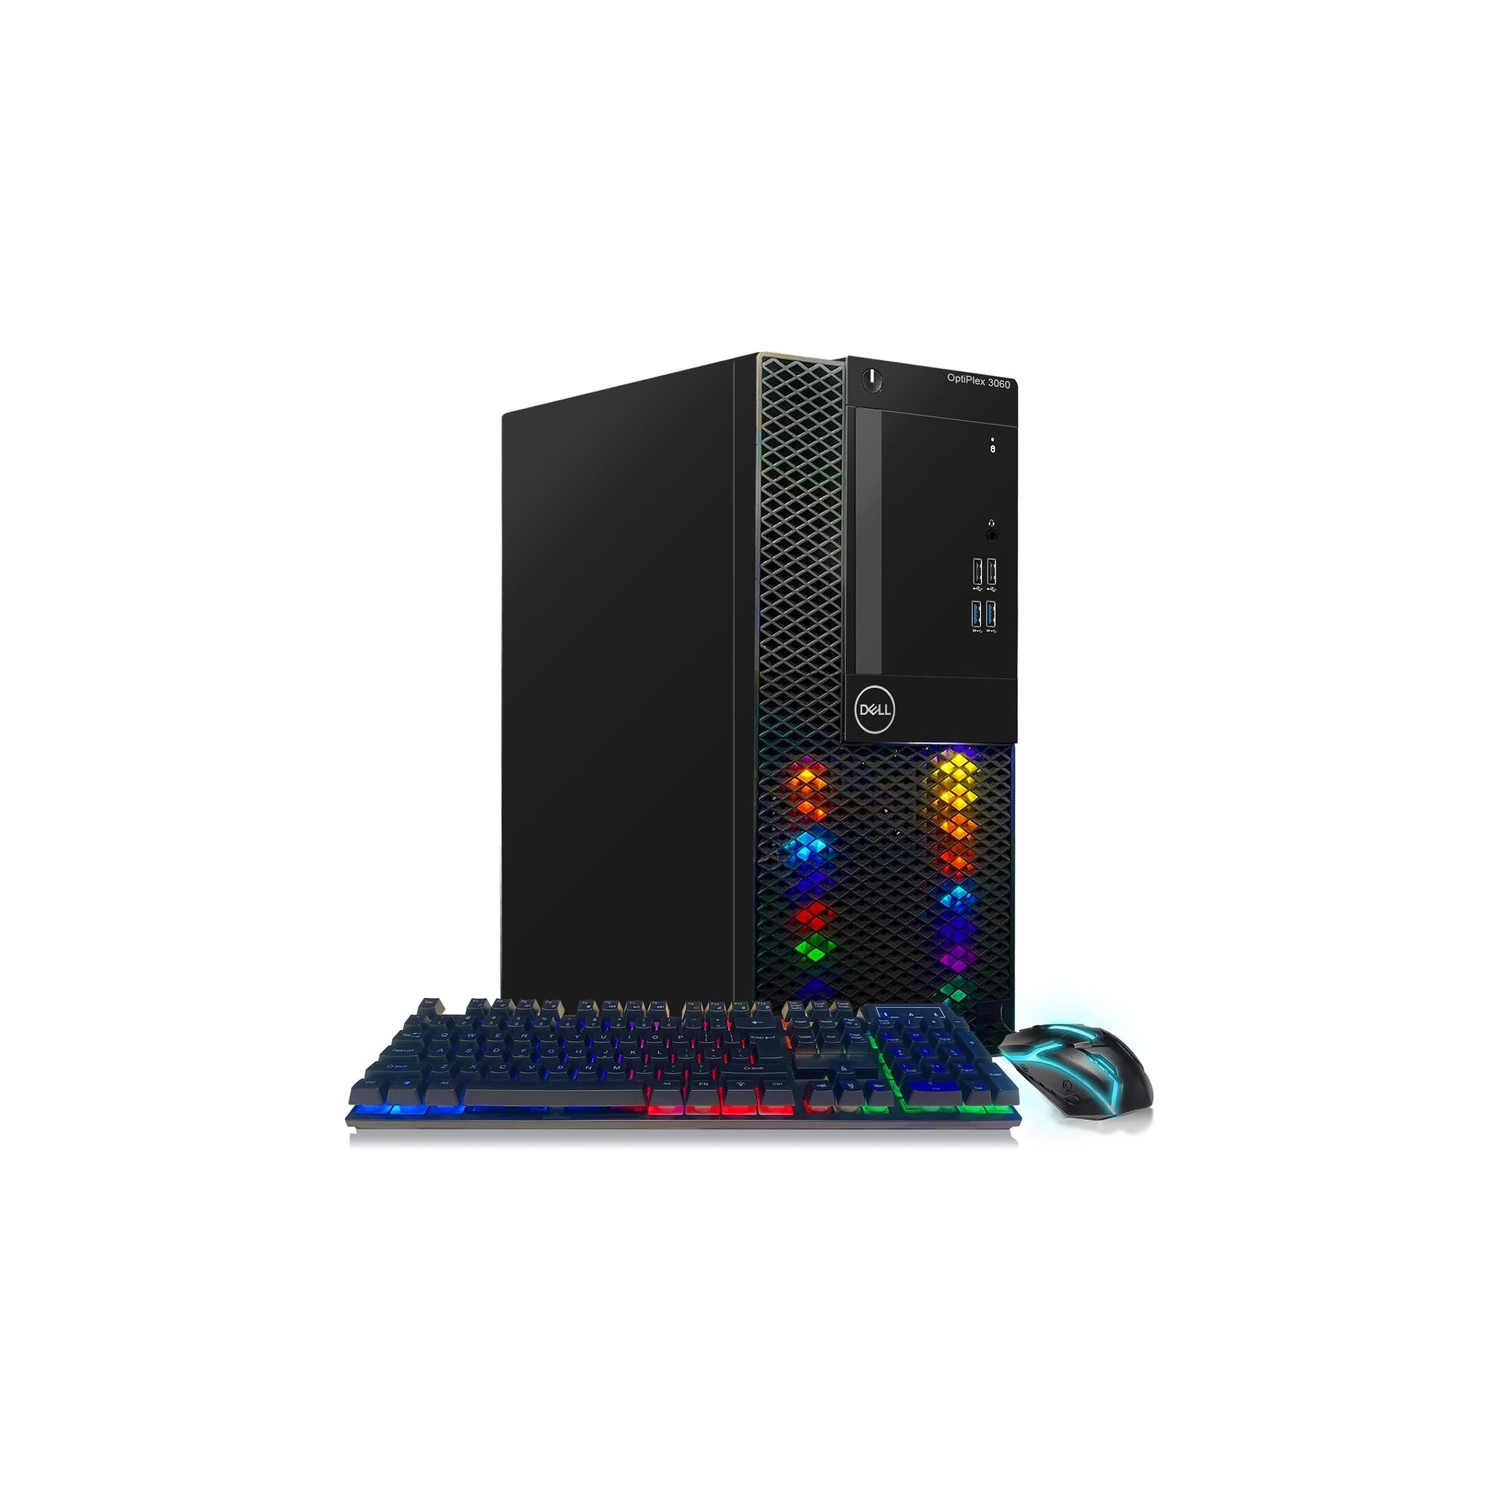 Dell RGB Gaming PC Desktop, Intel Core I5-8500 up to 4.1GHz, Radeon RX 580 8G, 32GB DDR4, 2T SSD, RGB Keyboard&Mouse, 600M WiFi & BT 5.0, W10P64 - Refurbished Excellent